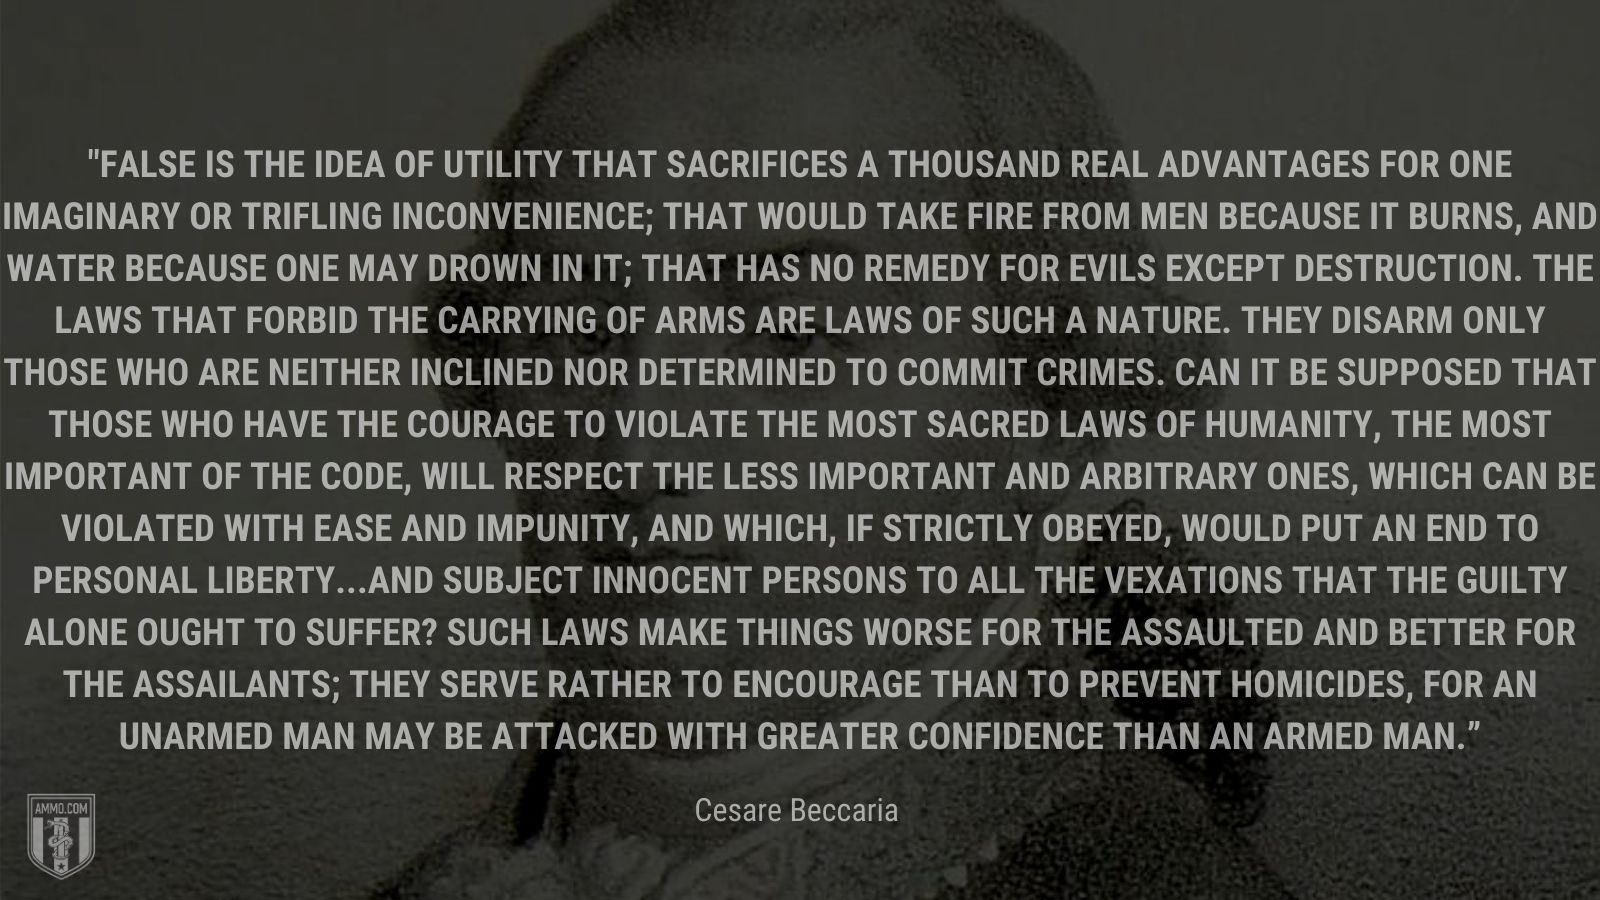 “False is the idea of utility that sacrifices a thousand real advantages for one imaginary or trifling inconvenience; that would take fire from men because it burns, and water because one may drown in it; that has no remedy for evils except destruction. The laws that forbid the carrying of arms are laws of such a nature. They disarm only those who are neither inclined nor determined to commit crimes. Can it be supposed that those who have the courage to violate the most sacred laws of humanity, the most important of the code, will respect the less important and arbitrary ones, which can be violated with ease and impunity, and which, if strictly obeyed, would put an end to personal liberty...and subject innocent persons to all the vexations that the guilty alone ought to suffer? Such laws make things worse for the assaulted and better for the assailants; they serve rather to encourage than to prevent homicides, for an unarmed man may be attacked with greater confidence than an armed man.” - Cesare Beccaria